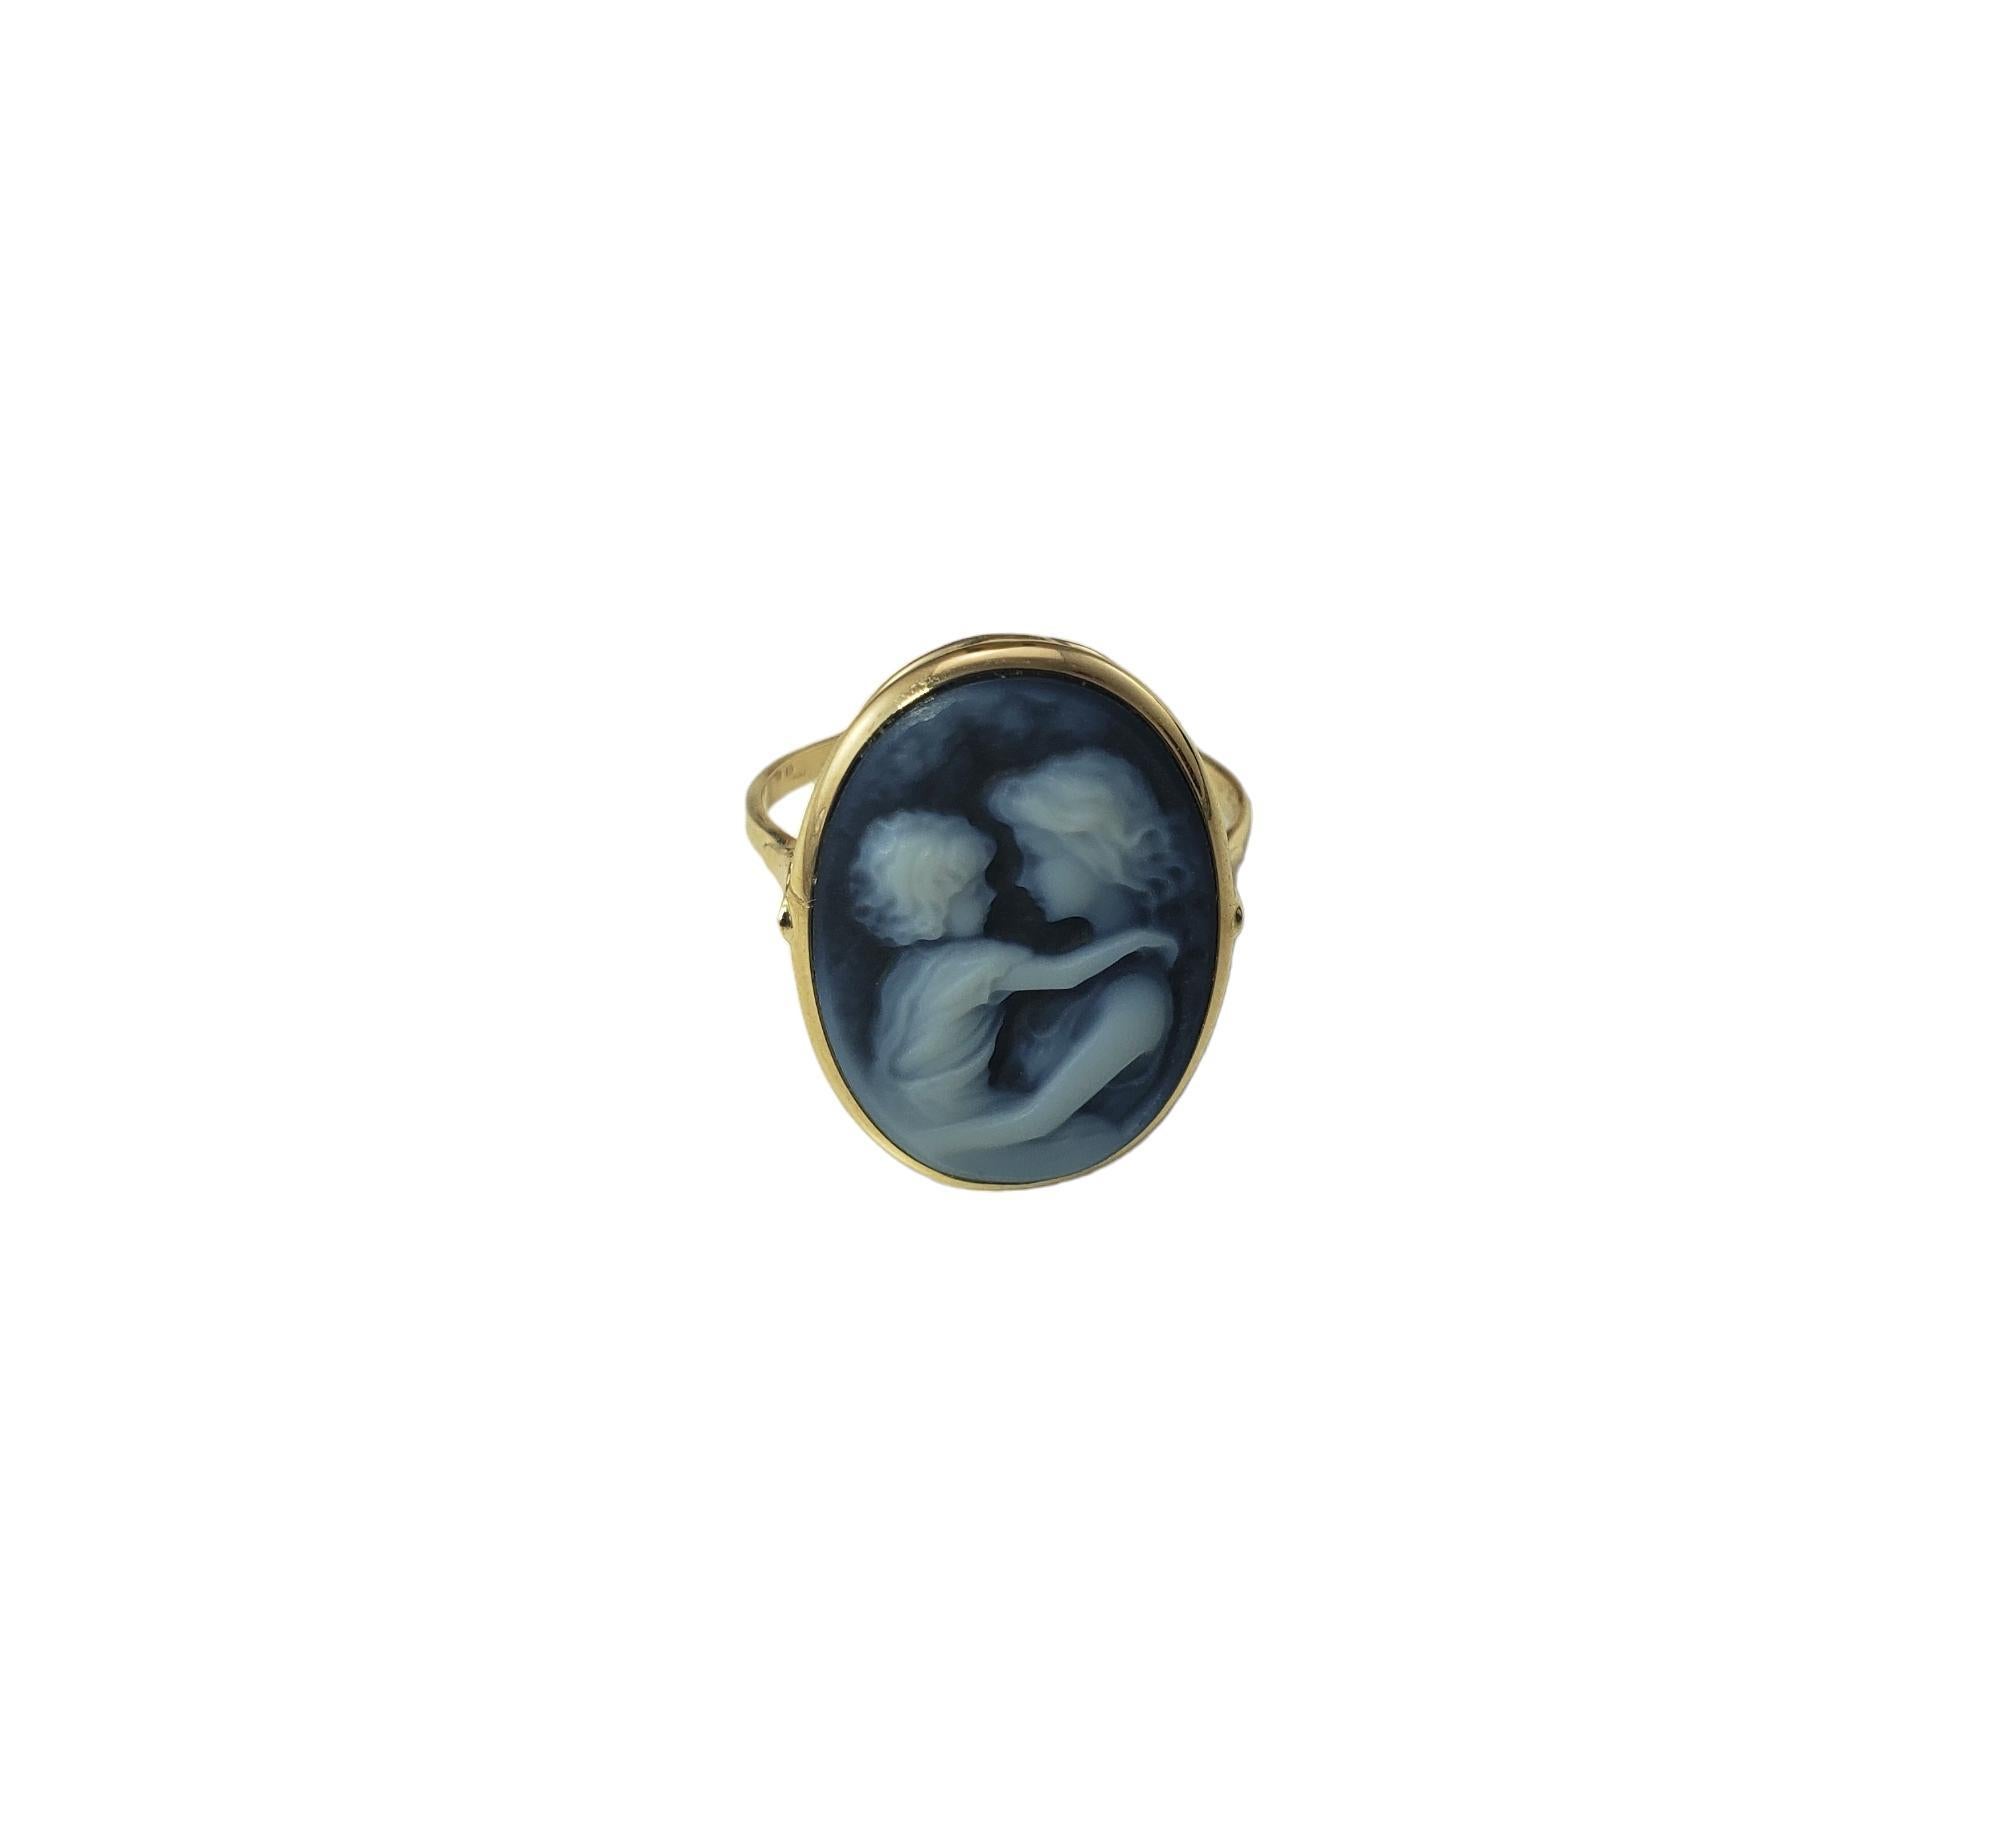 Vintage 14 Karat Yellow Gold Blue Agate Mother Child Cameo Ring Size 7-

This elegant cameo ring depicts a mother and child crafted in blue agate and set in classic 14K yellow gold.  Top of ring measures 19.6 mm x 15.1 mm.  Shank: 1.6 mm.

Matching